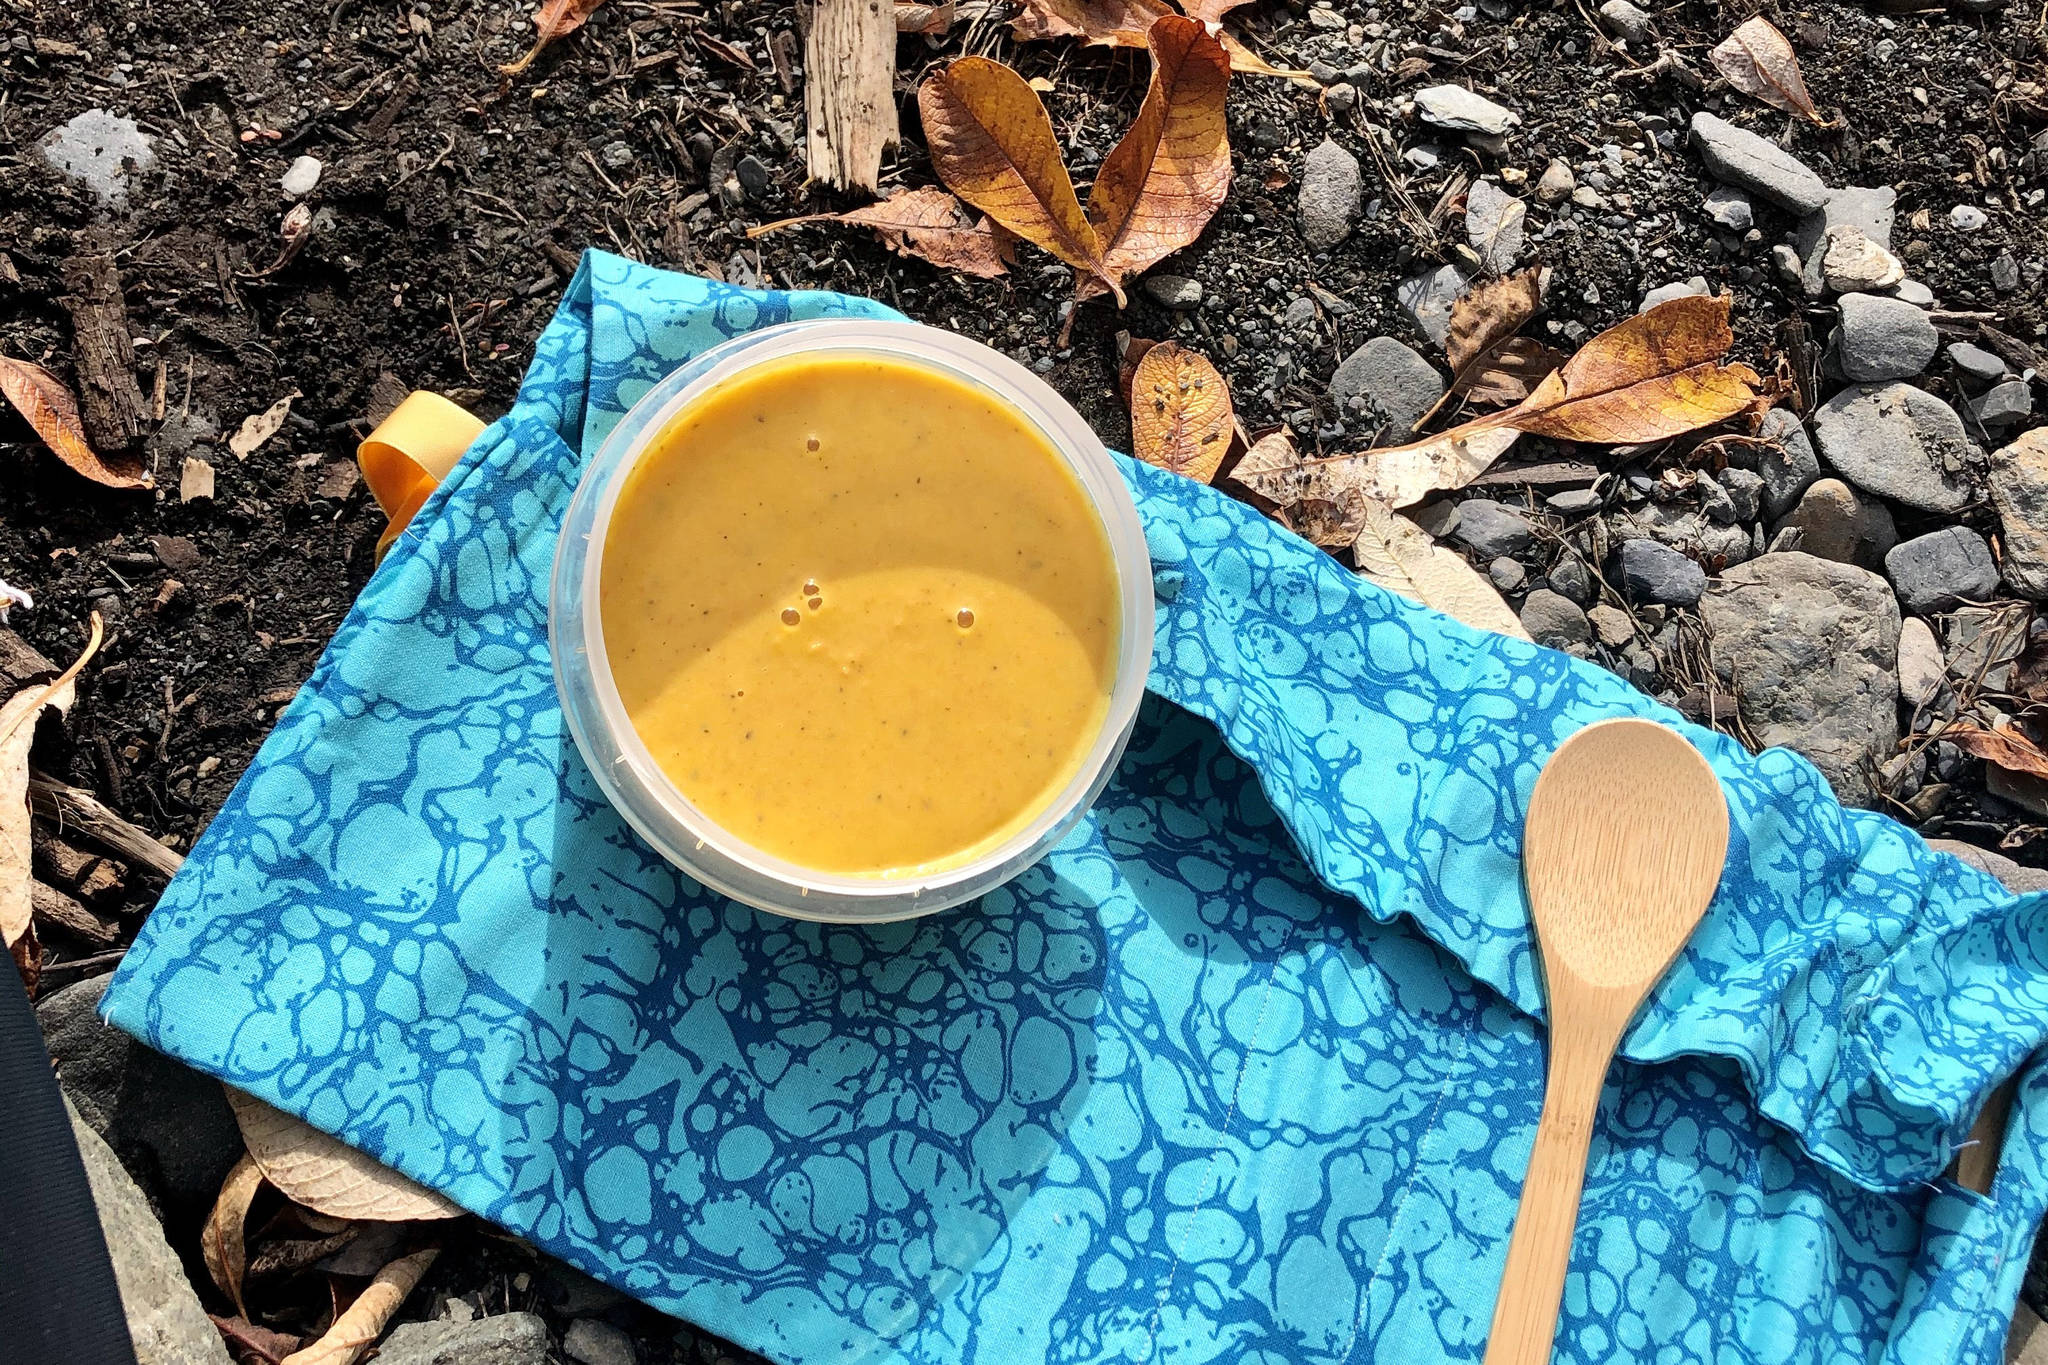 Butternut squash soup picnic is enjoyed on the rocky beach at Eklutna Lake, on Sunday, Sept. 27, 2020 in Anchorage, Alaska. (Photo by Victoria Petersen/Peninsula Clarion)